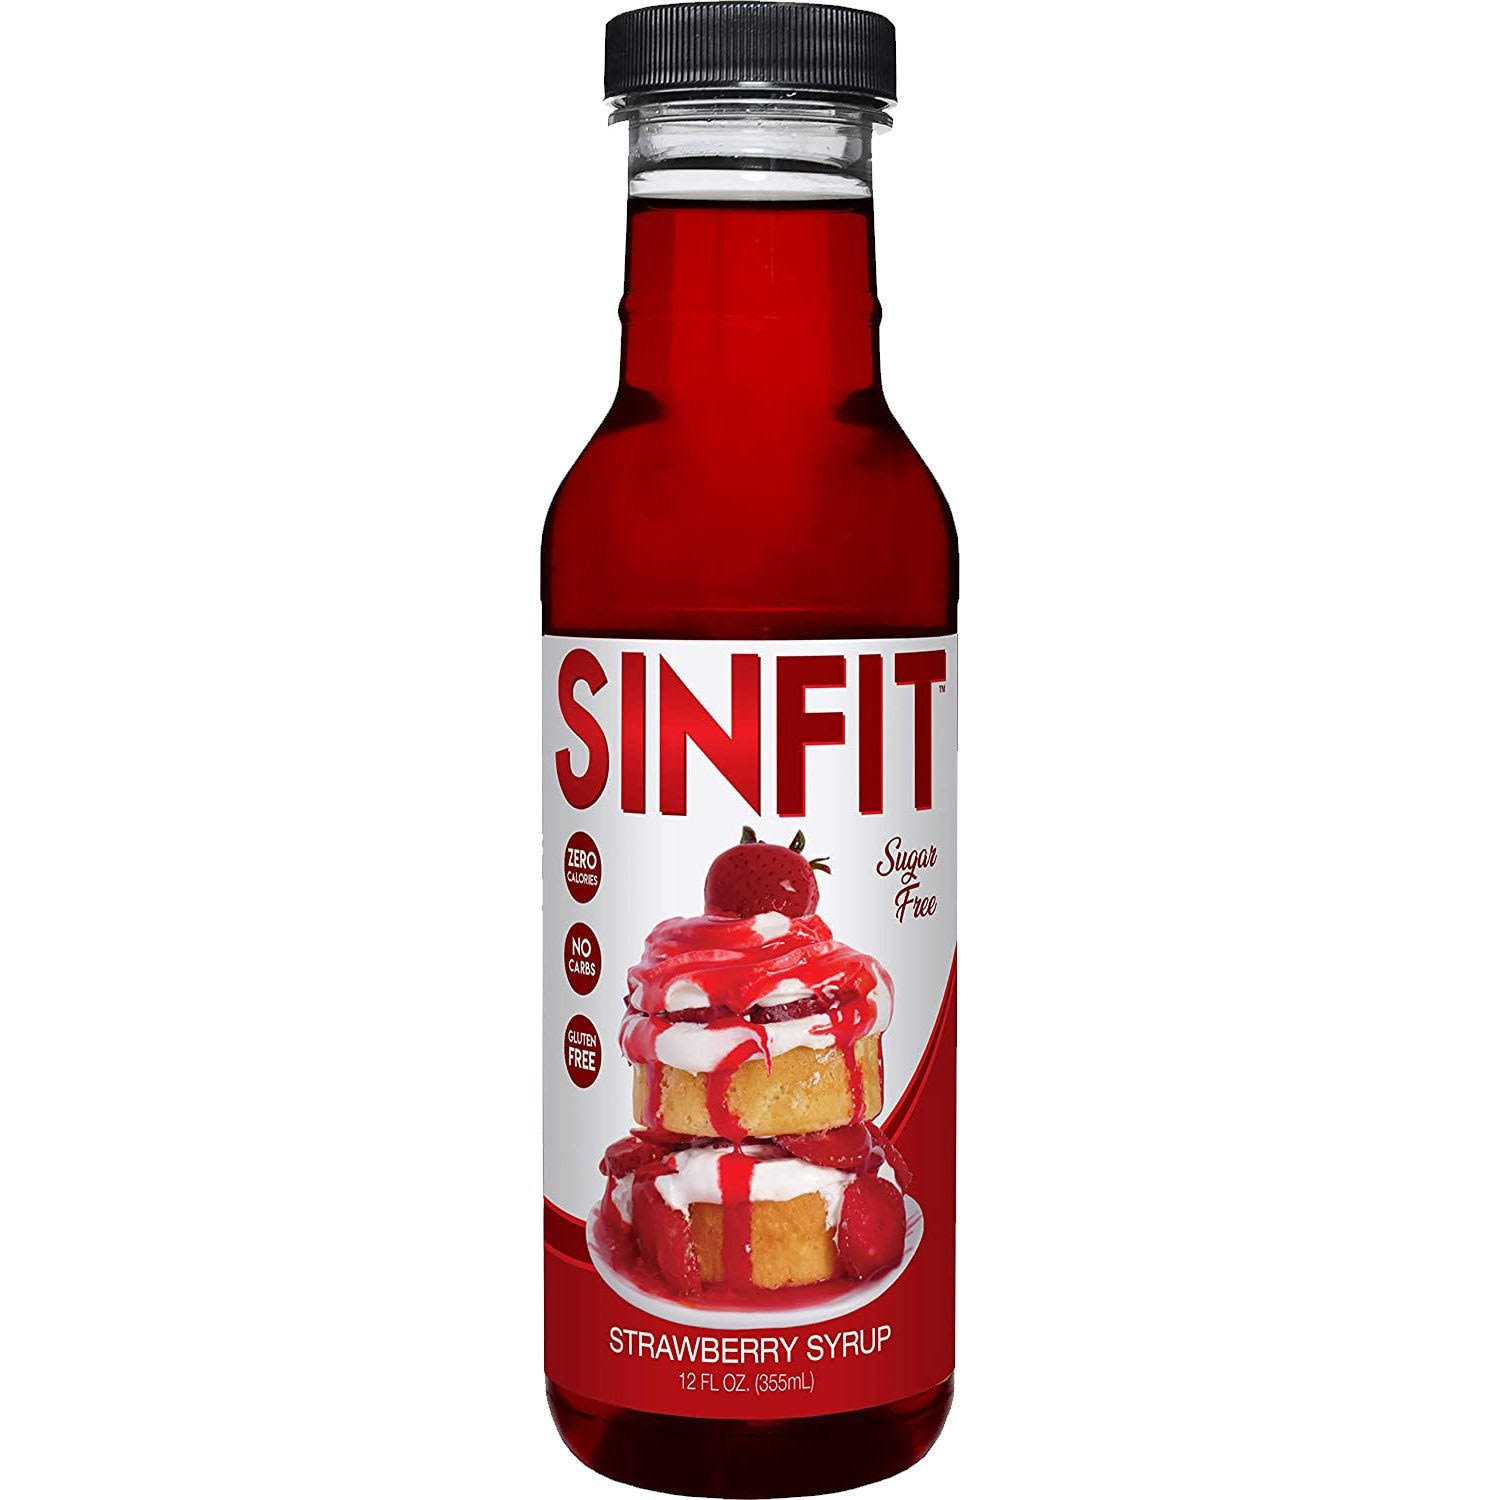 SinFit Strawberry Syrup